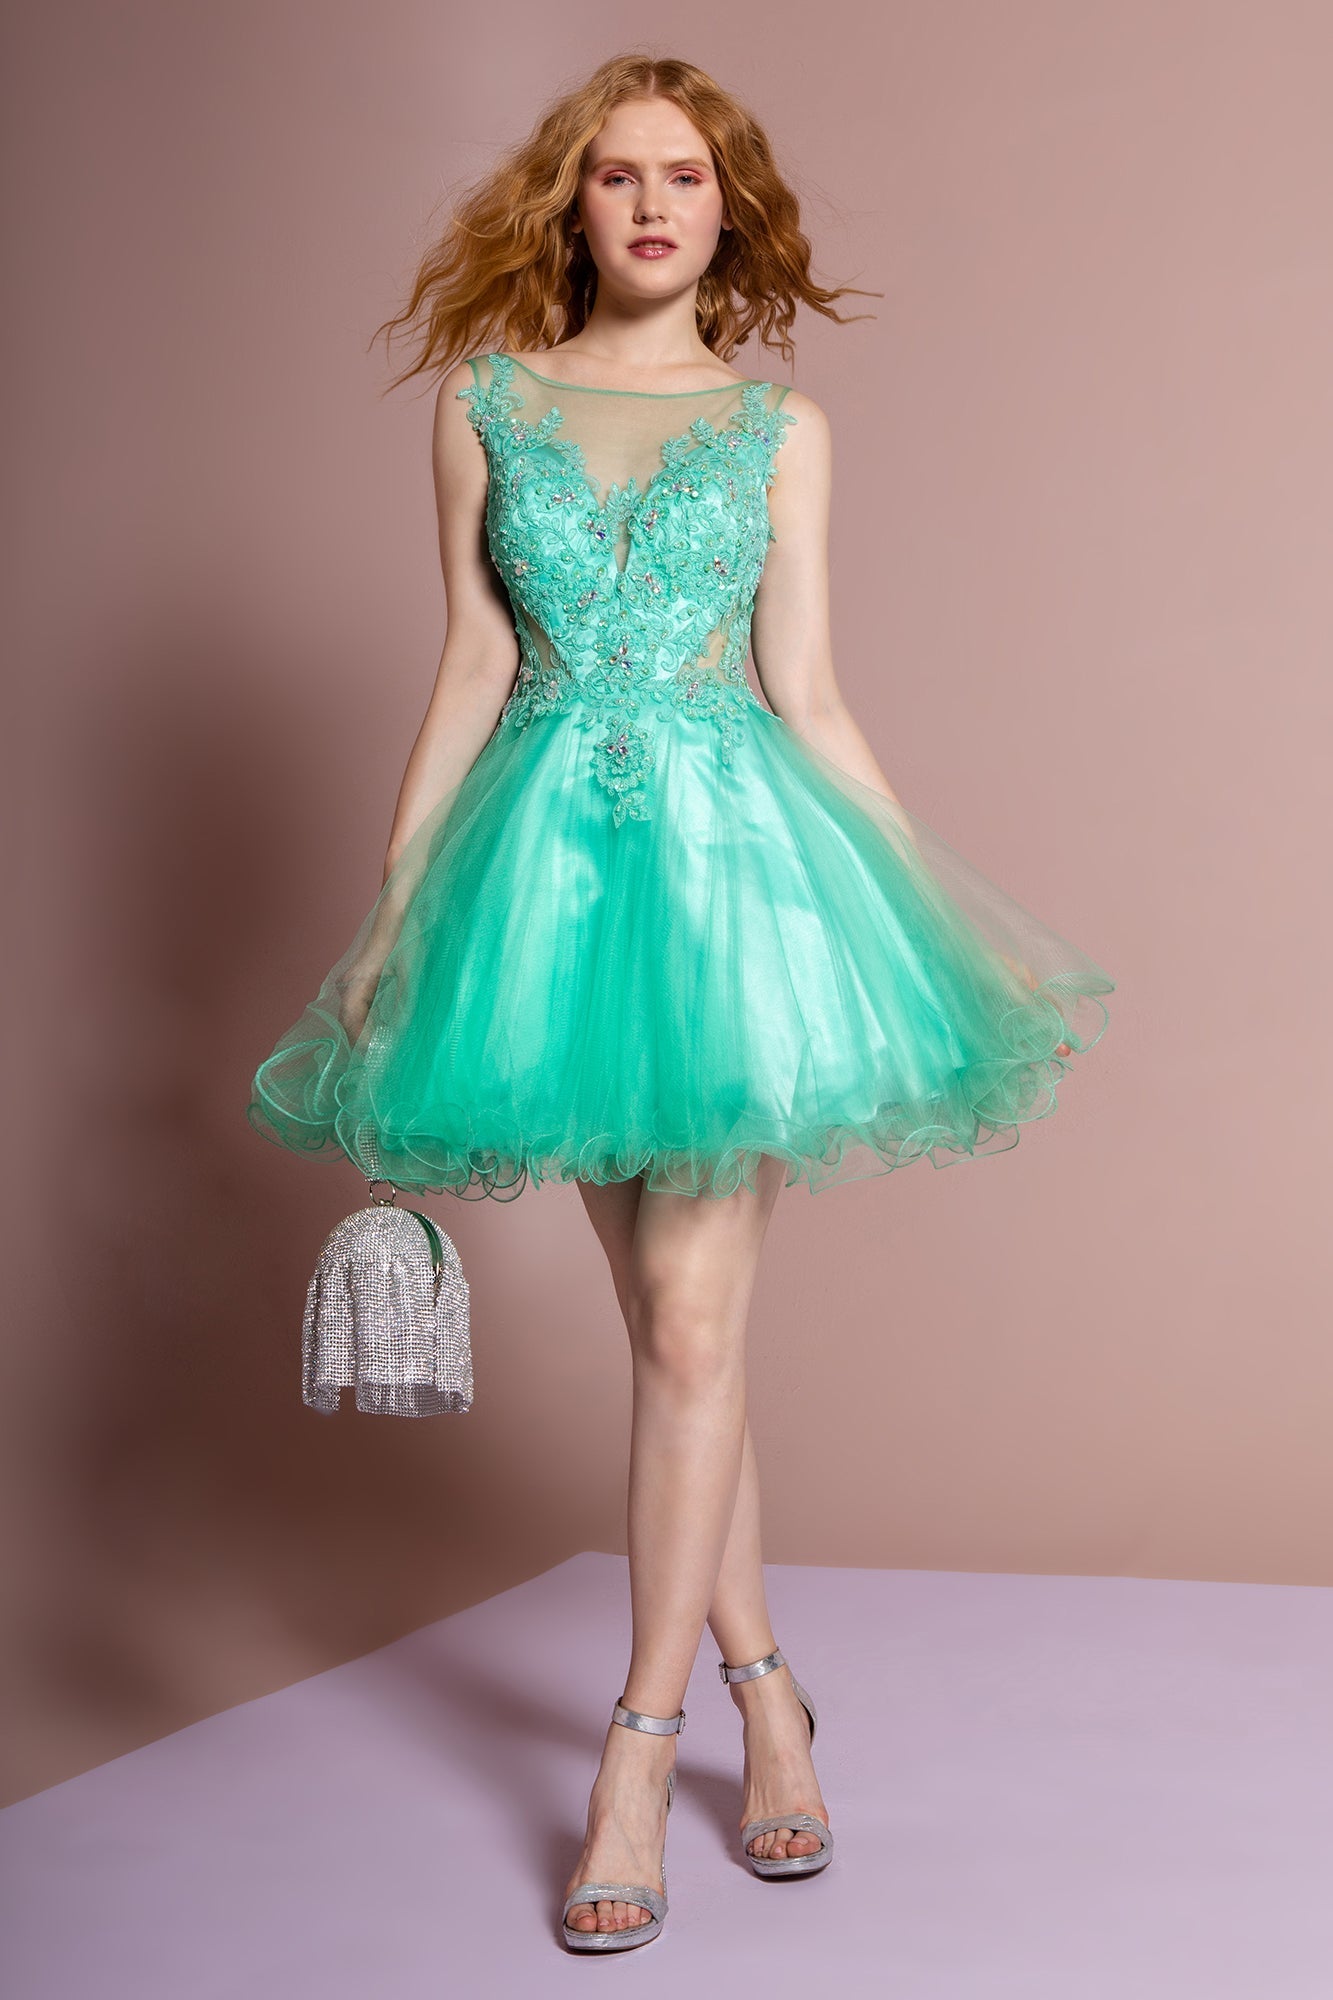 Rolled Hem Short Dress with Sheer Bodice GLGS2156 Elsy Style HOMECOMING